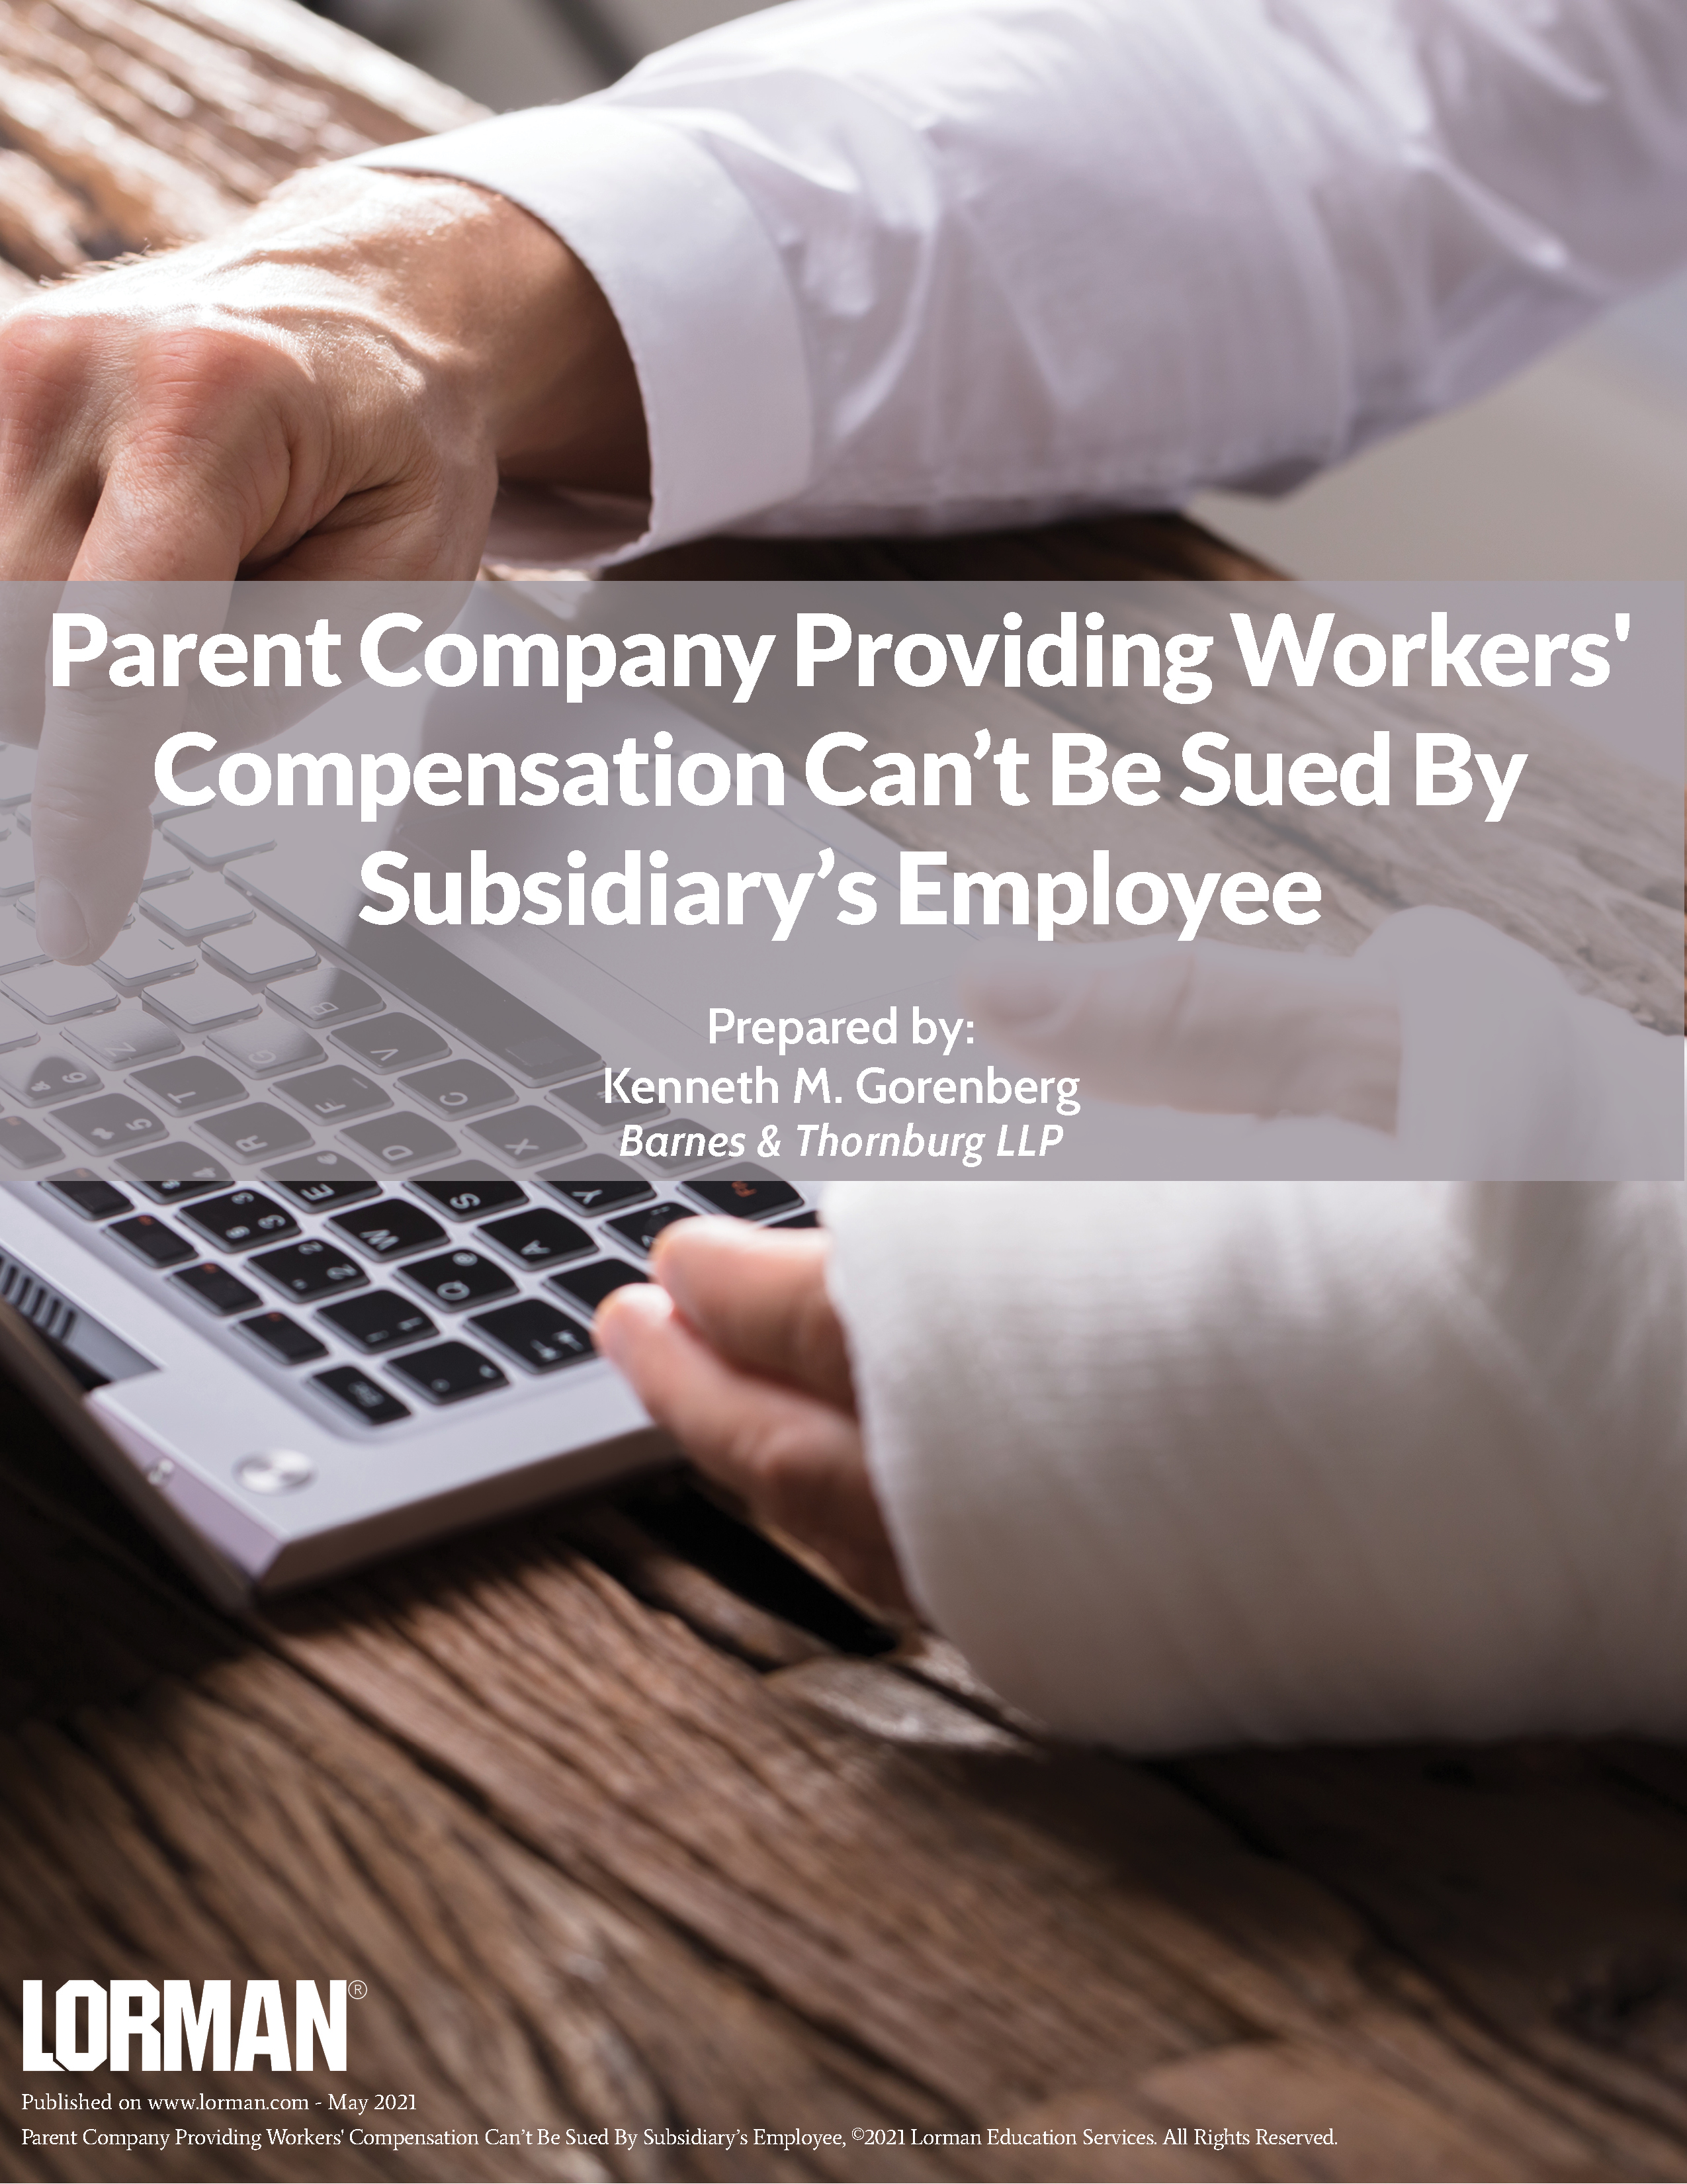 Parent Company Providing Workers' Compensation Can't Be Sued By Subsidiary's Employee